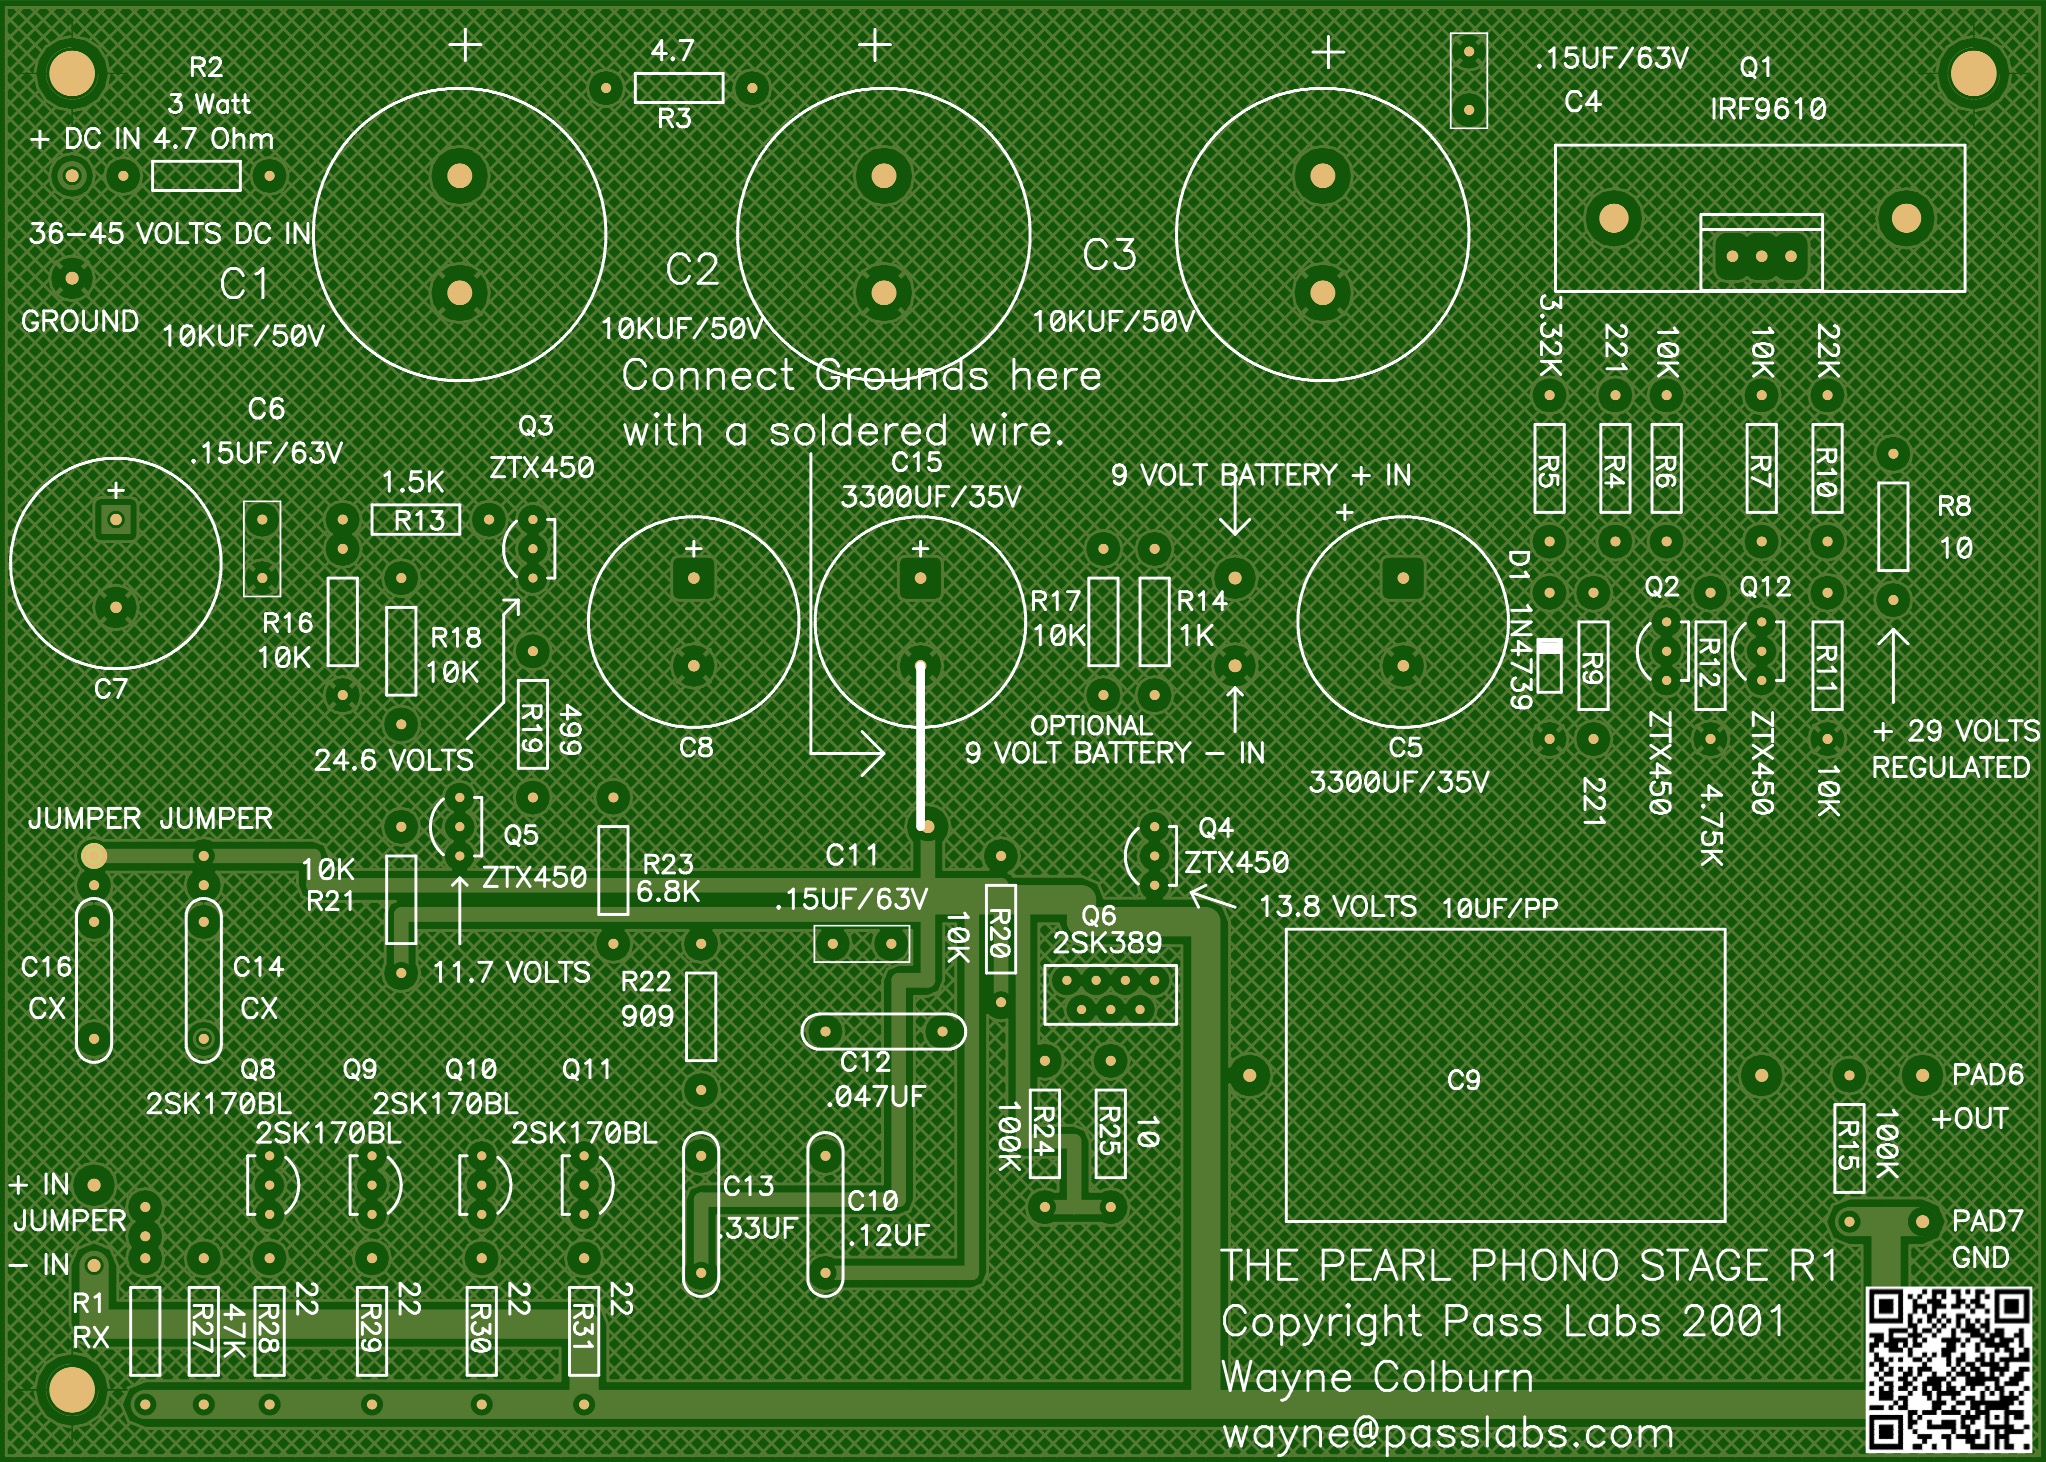 wittnetde Pass Labs The Pearl Phone Stage R1 wm